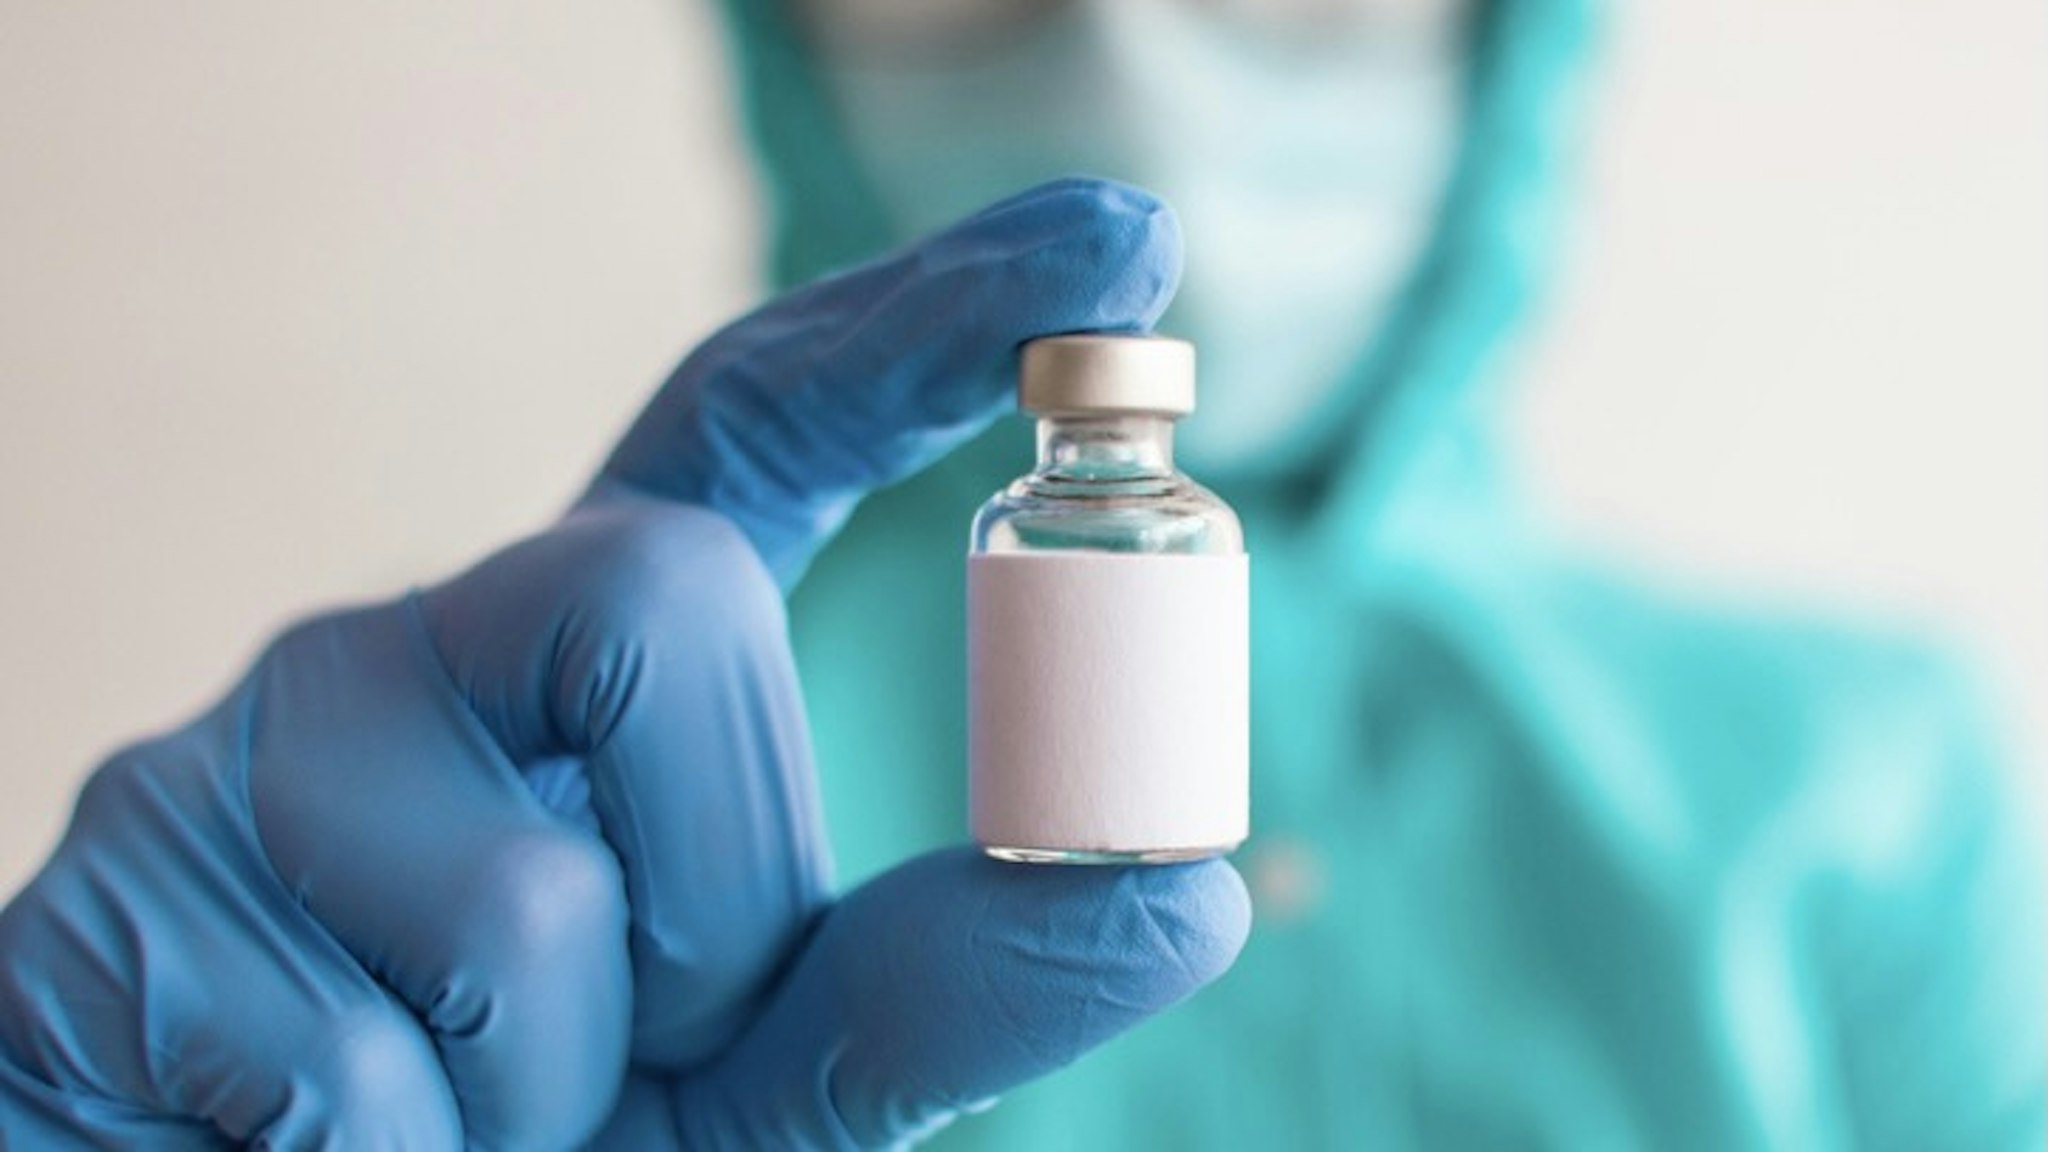 A female healthcare worker is holding a medicine vial - stock photo A female healthcare worker in vibrant colored protective suit is holding a medicine vial